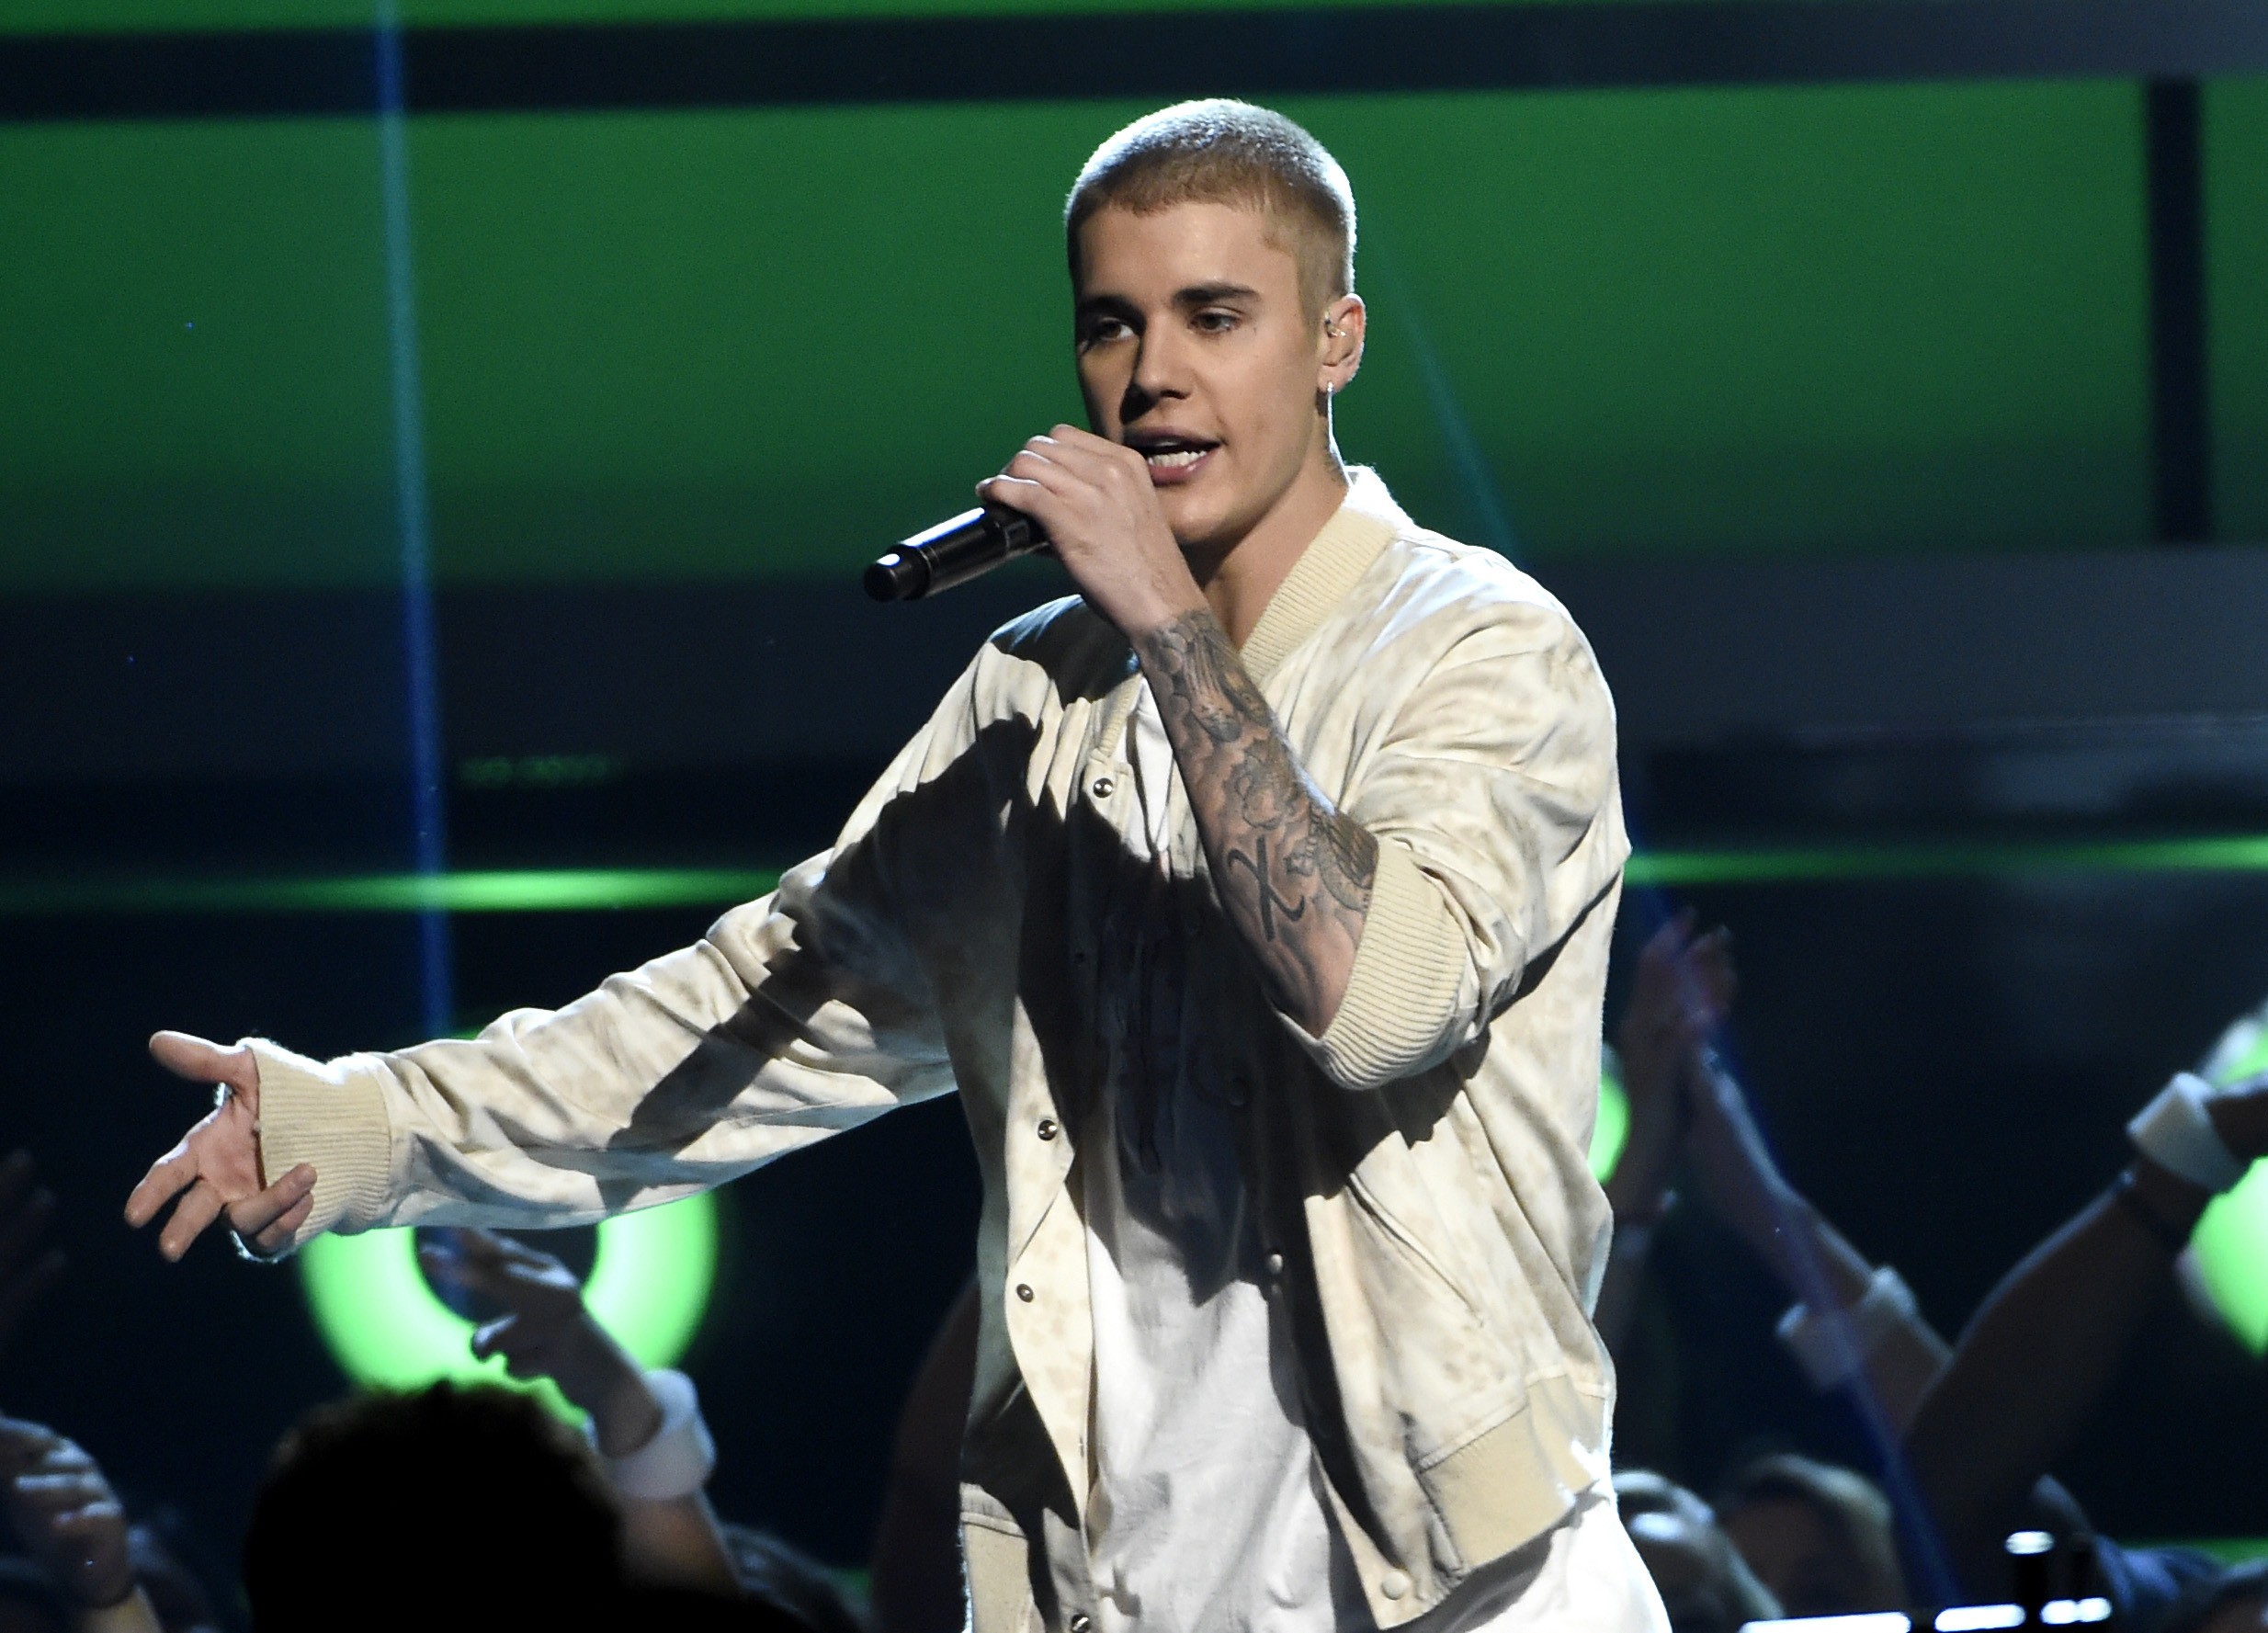 A concert in Cardiff, Wales, by pop star Justin Bieber – seen here performing elsewhere – was the intended target of a teenager inspired by Islamic State, a UK court has heard. Photo: AP